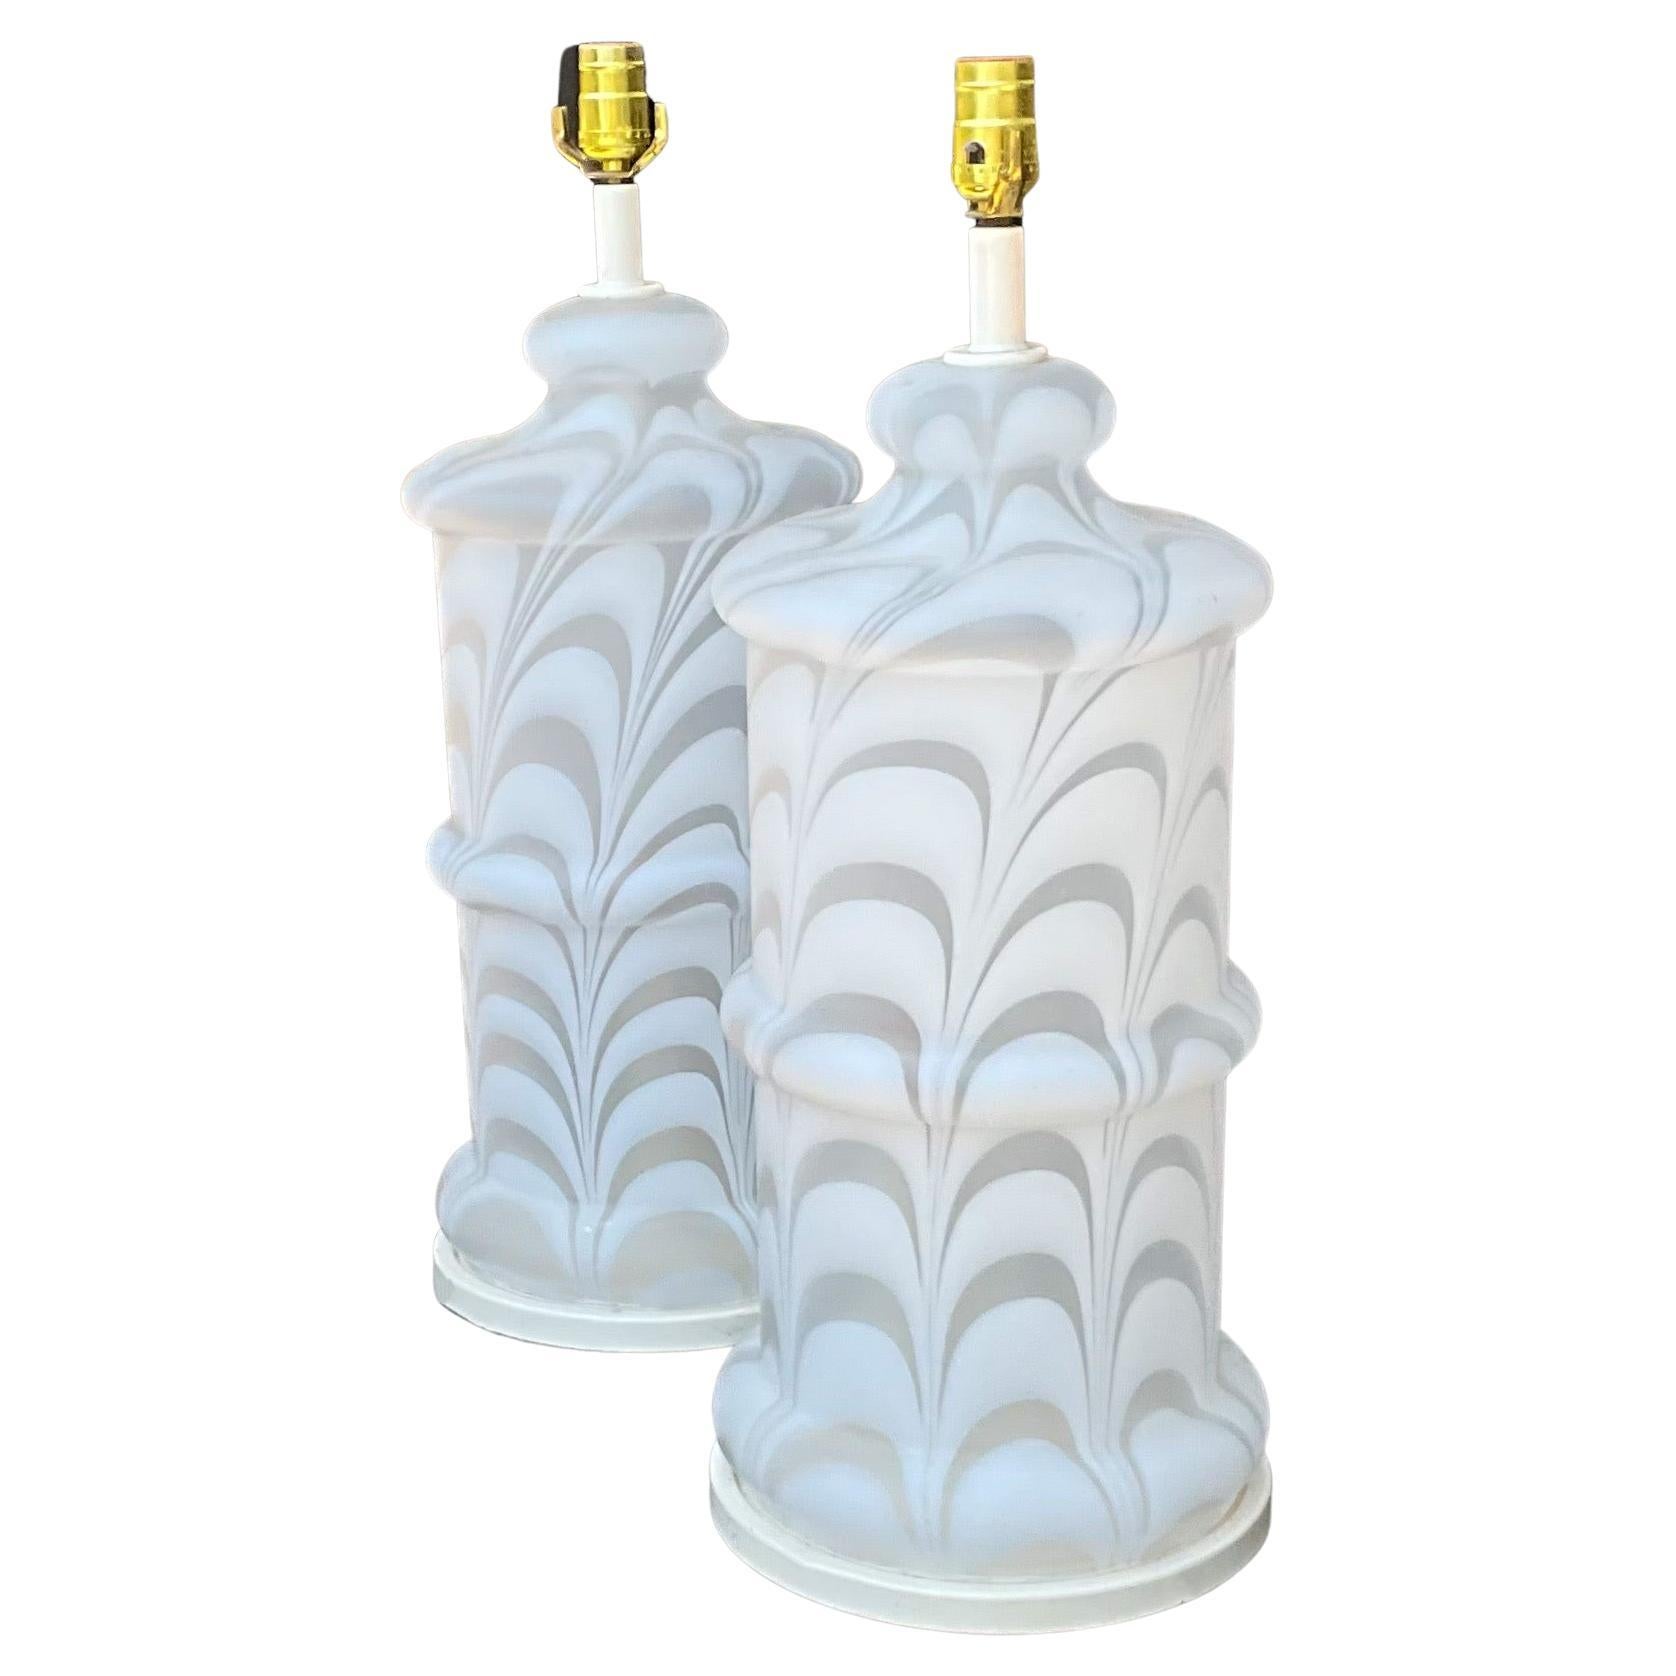 1970s Modern Monumental Mazzega Style Swirled Murano Glass Table Lamps - Pair For Sale